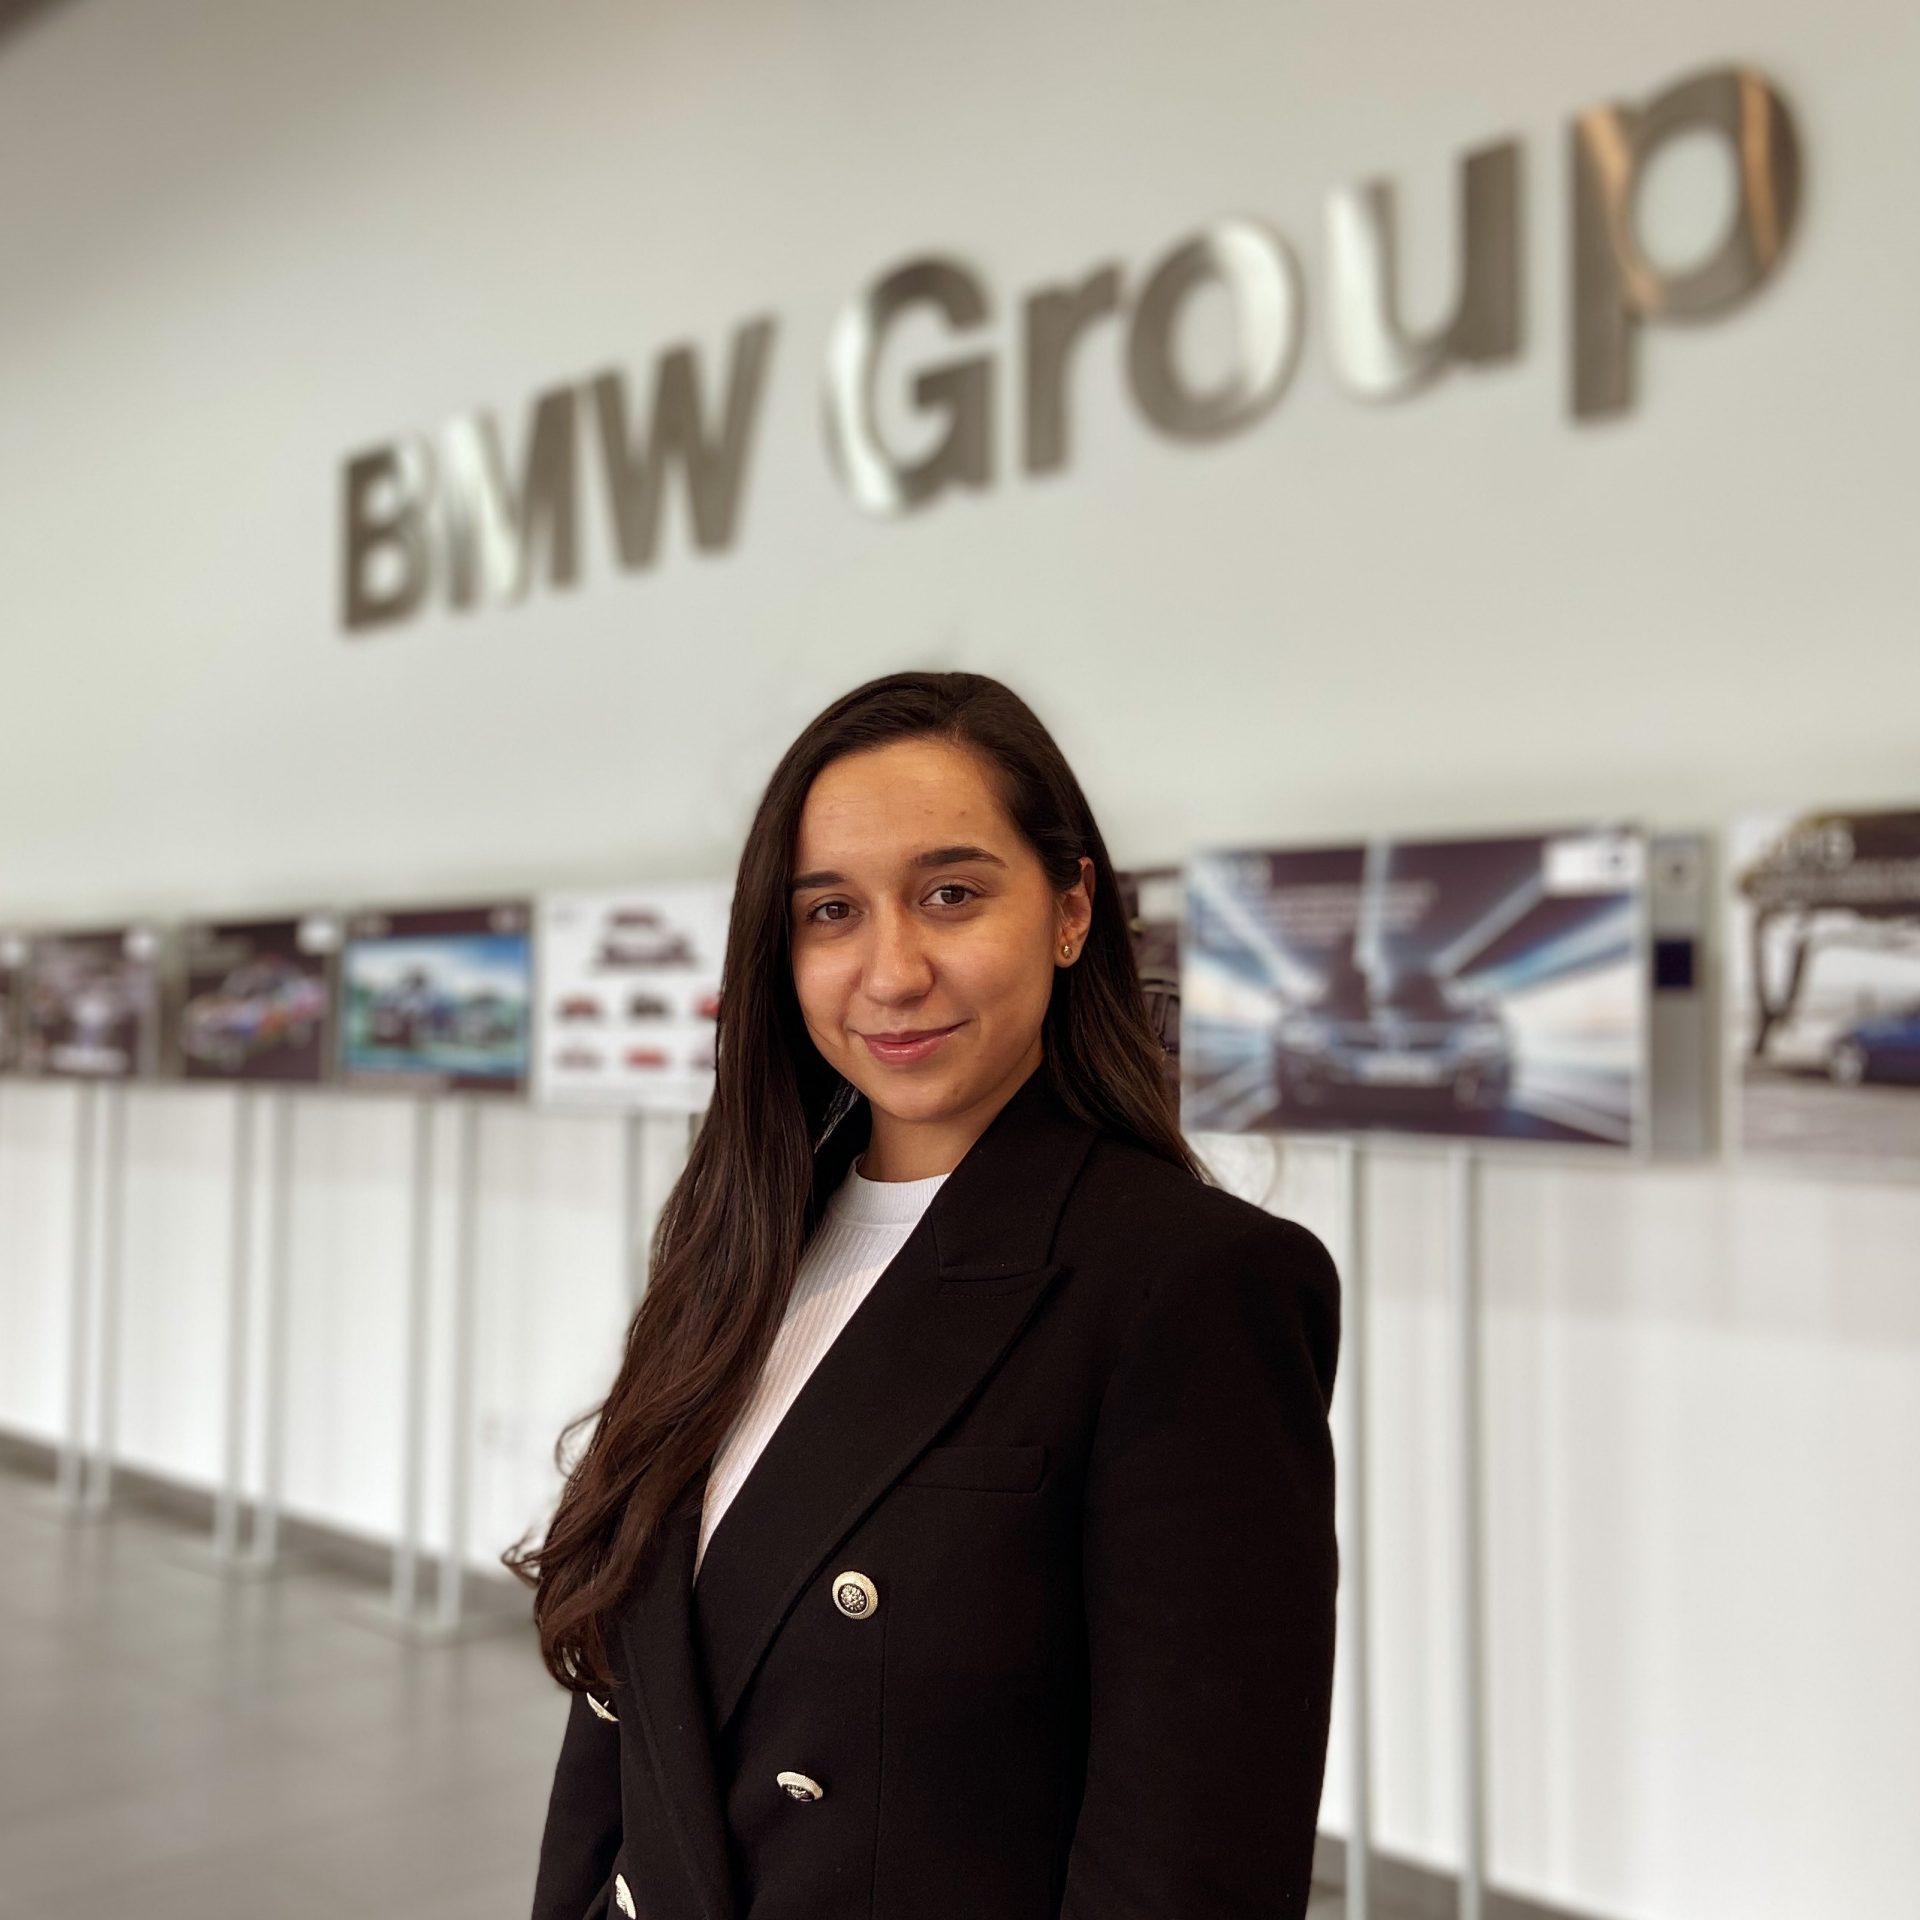 This picture shows Marta who works at BMW.